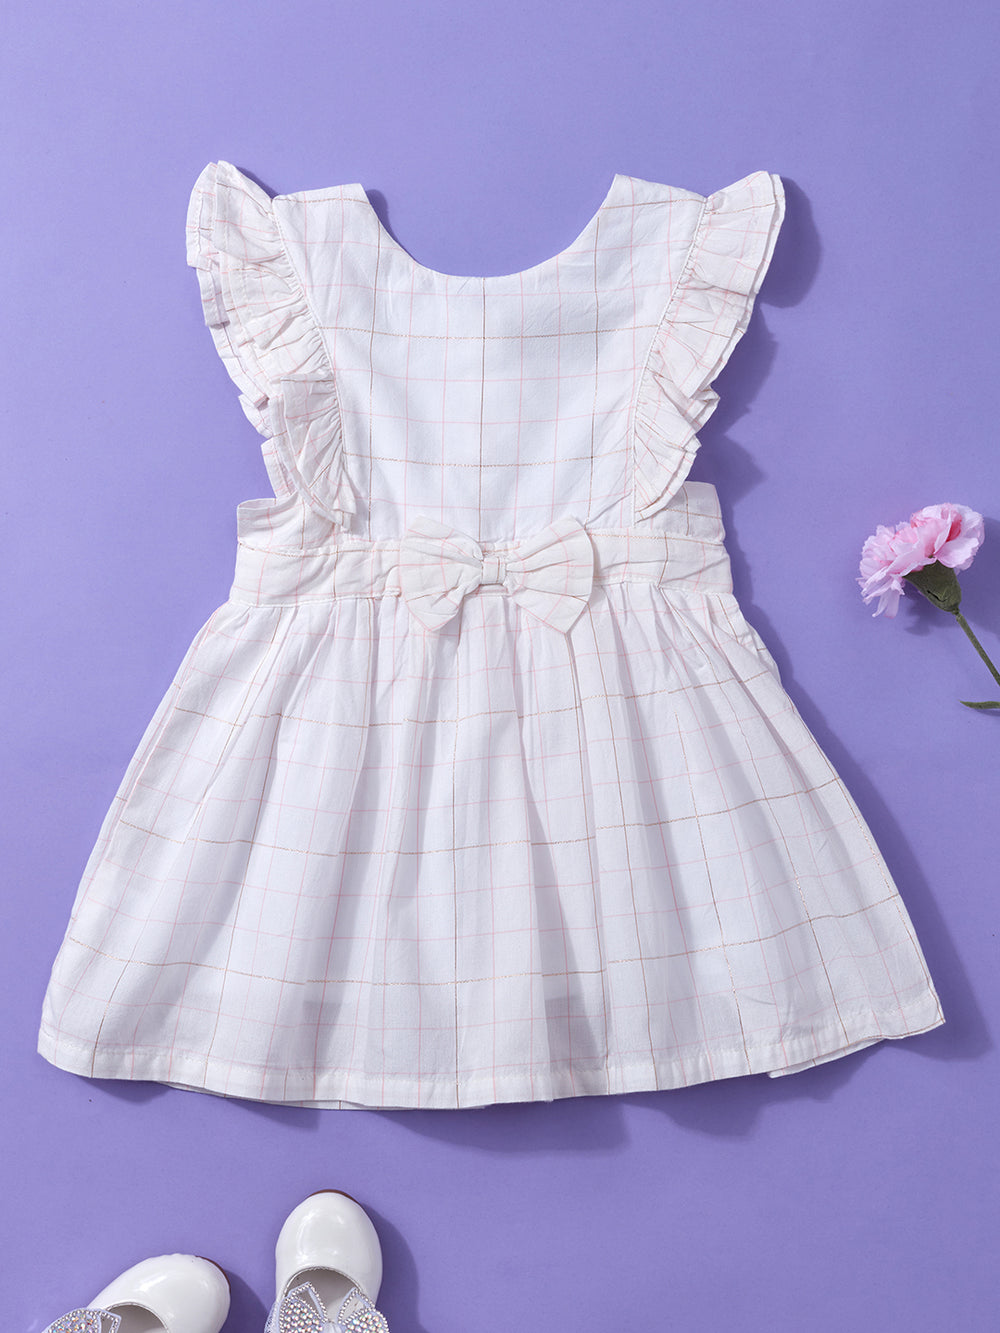 Nuberry Girl Frock Dress - White with Golden Lurex Stripe